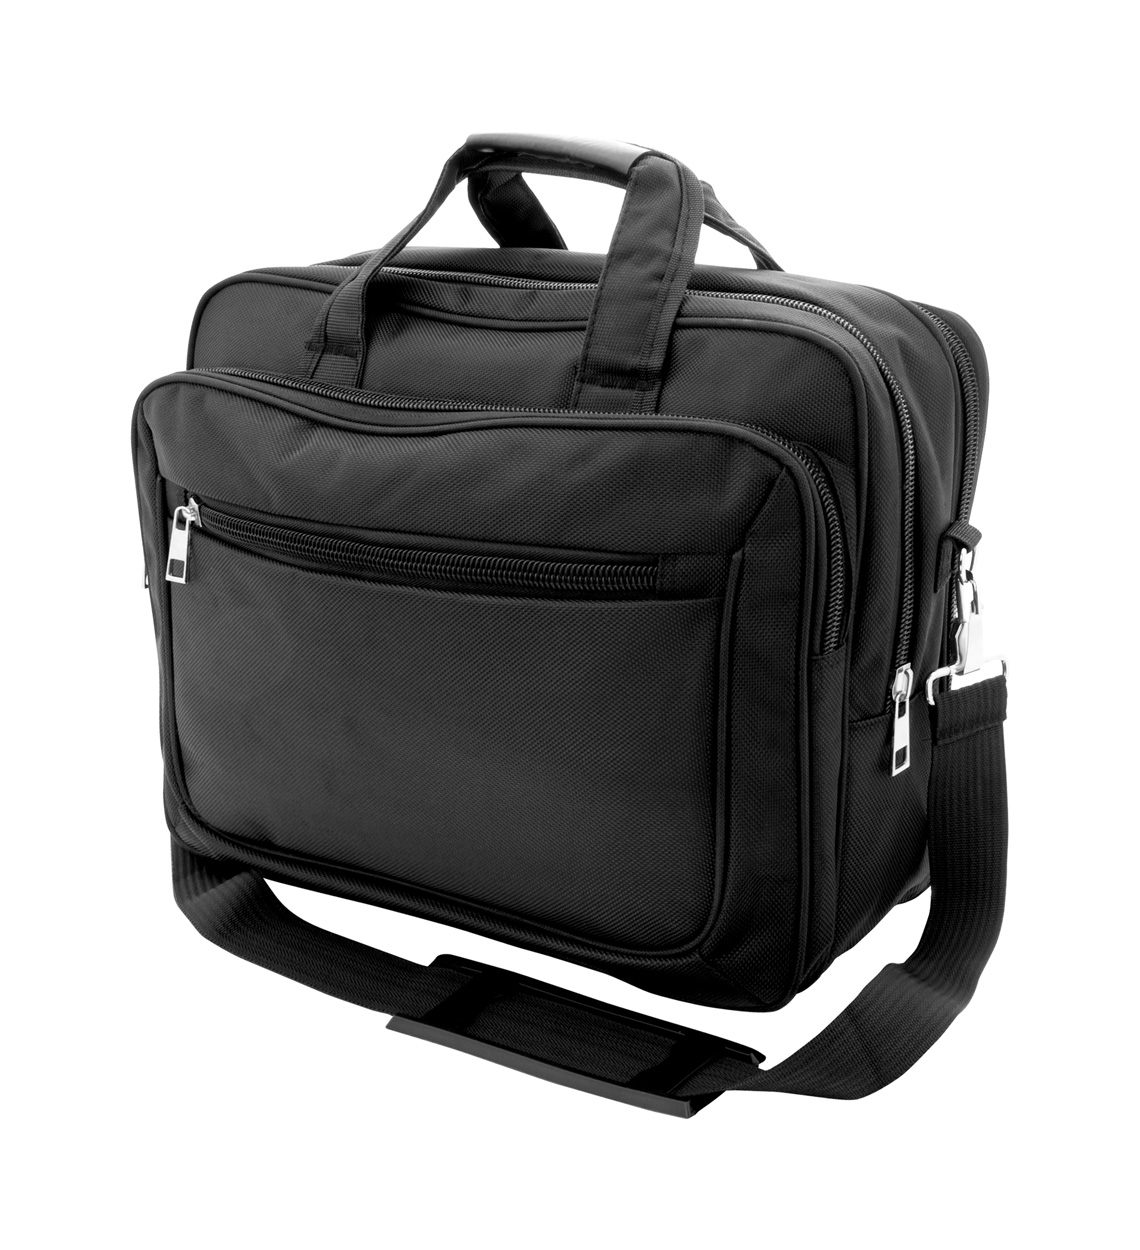 Polyester document bag SEKTOR with laptop space - black